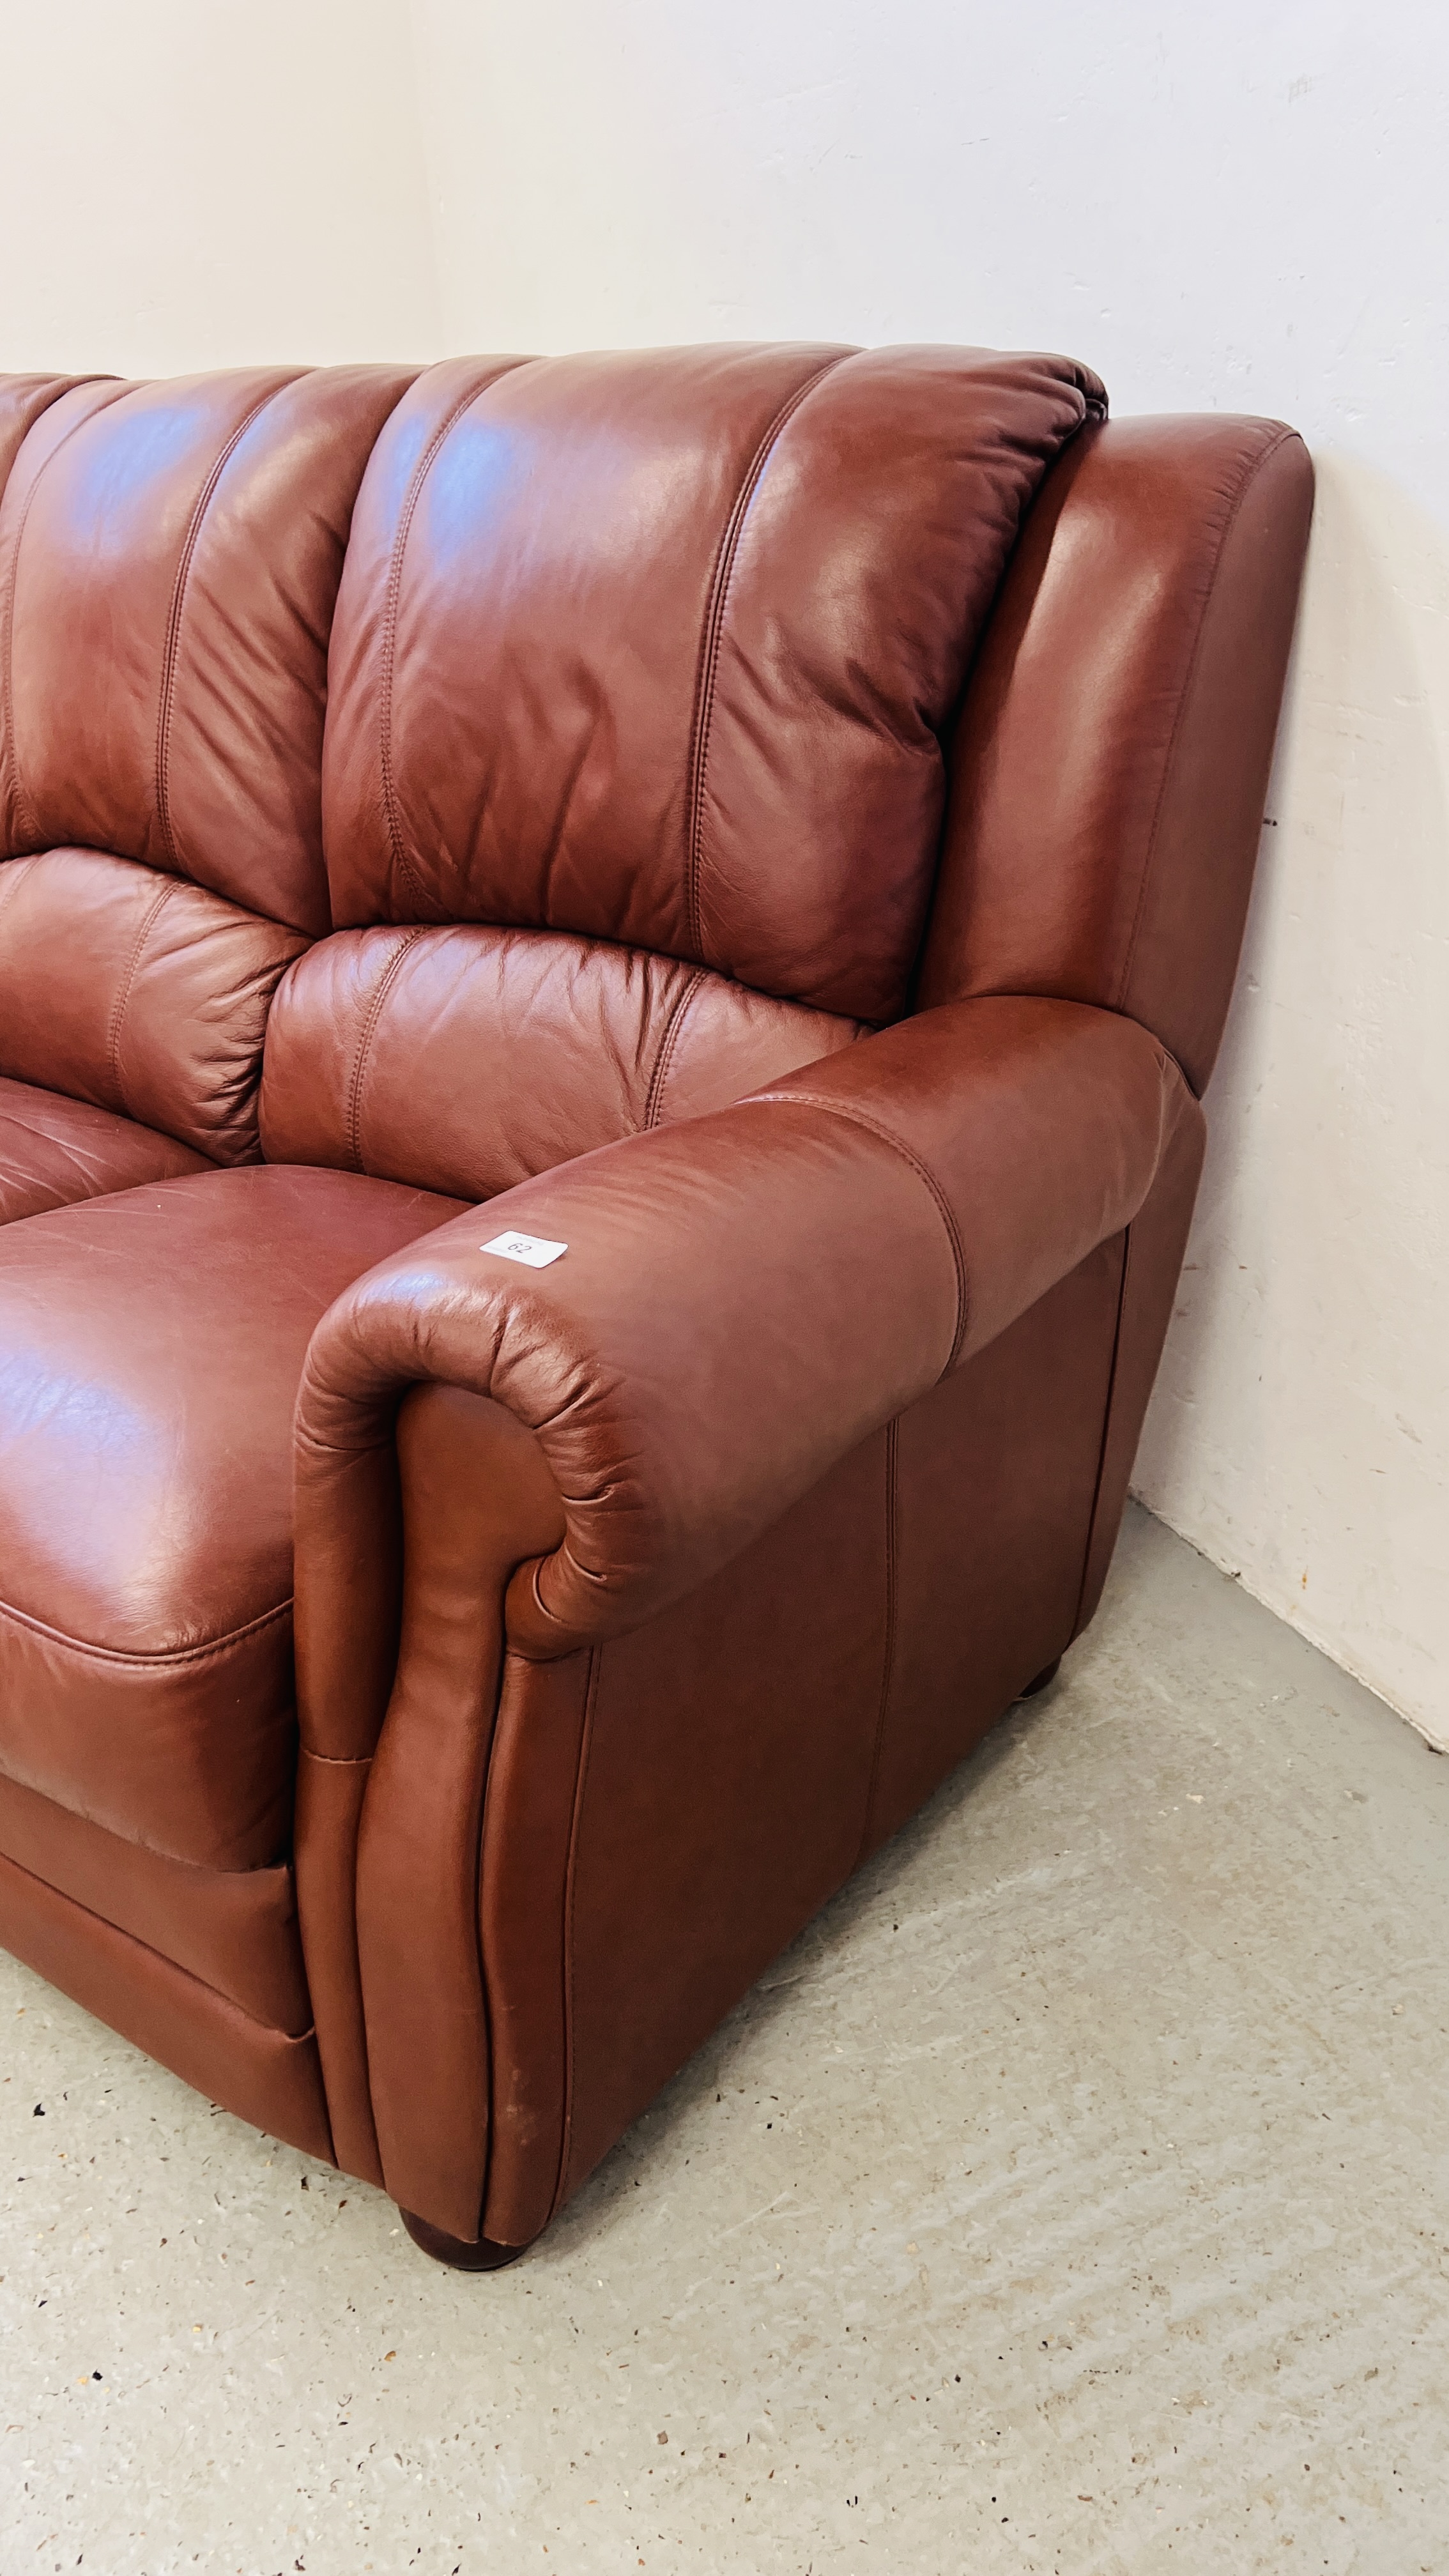 DESIGNER 3 SEATER BROWN LEATHER SOFA - Image 5 of 15